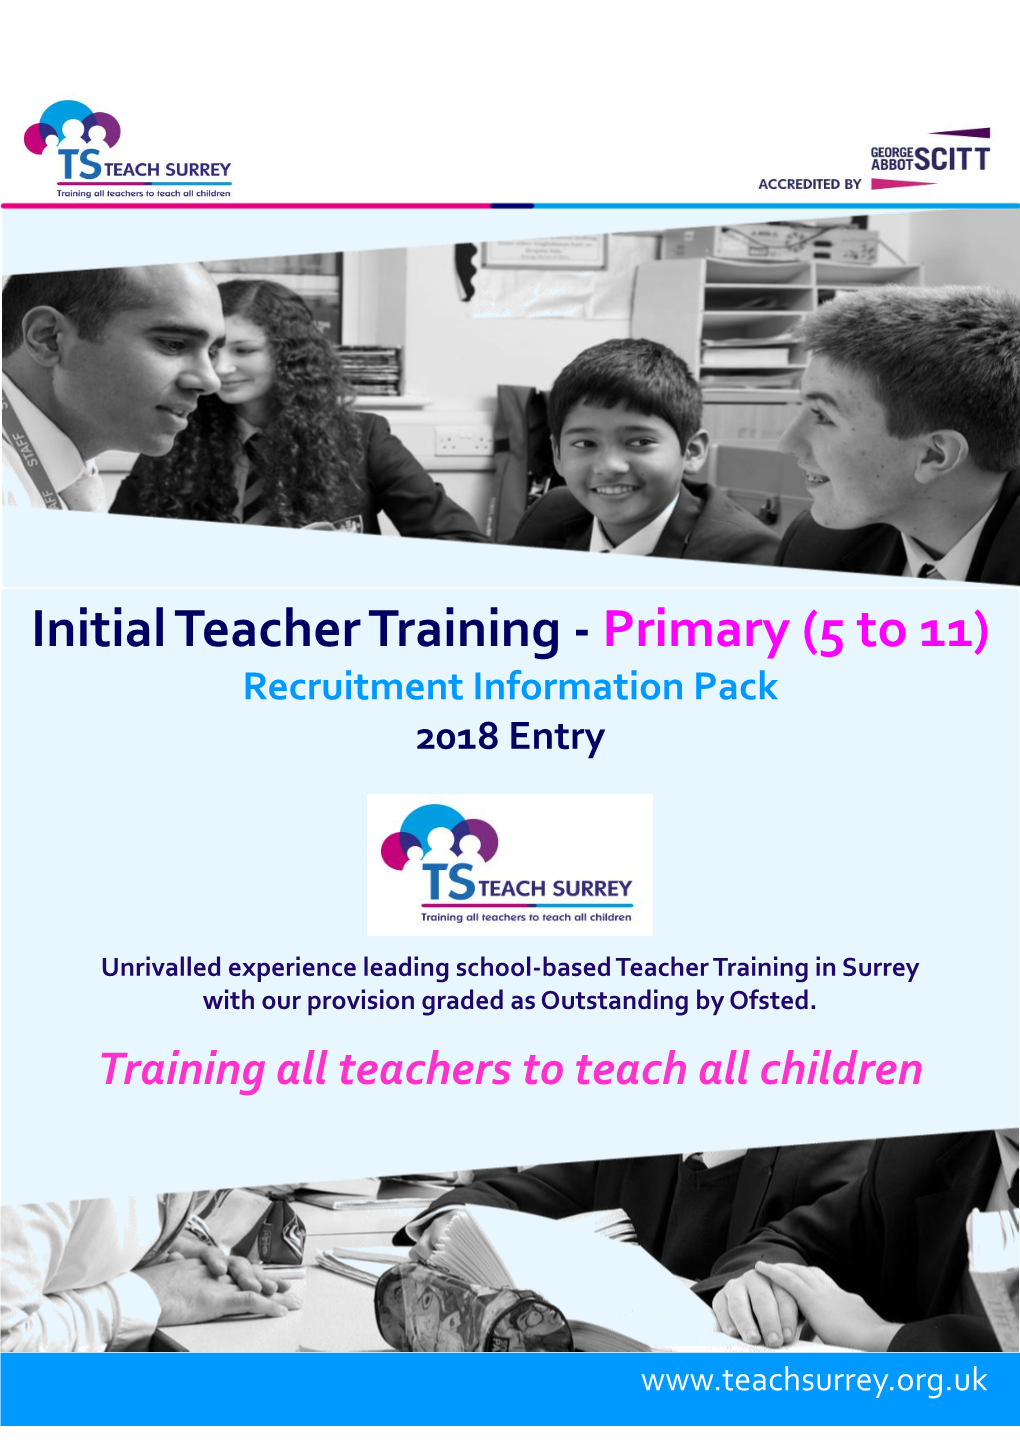 Initial Teacher Training - Primary (5 to 11) Recruitment Information Pack 2018 Entry